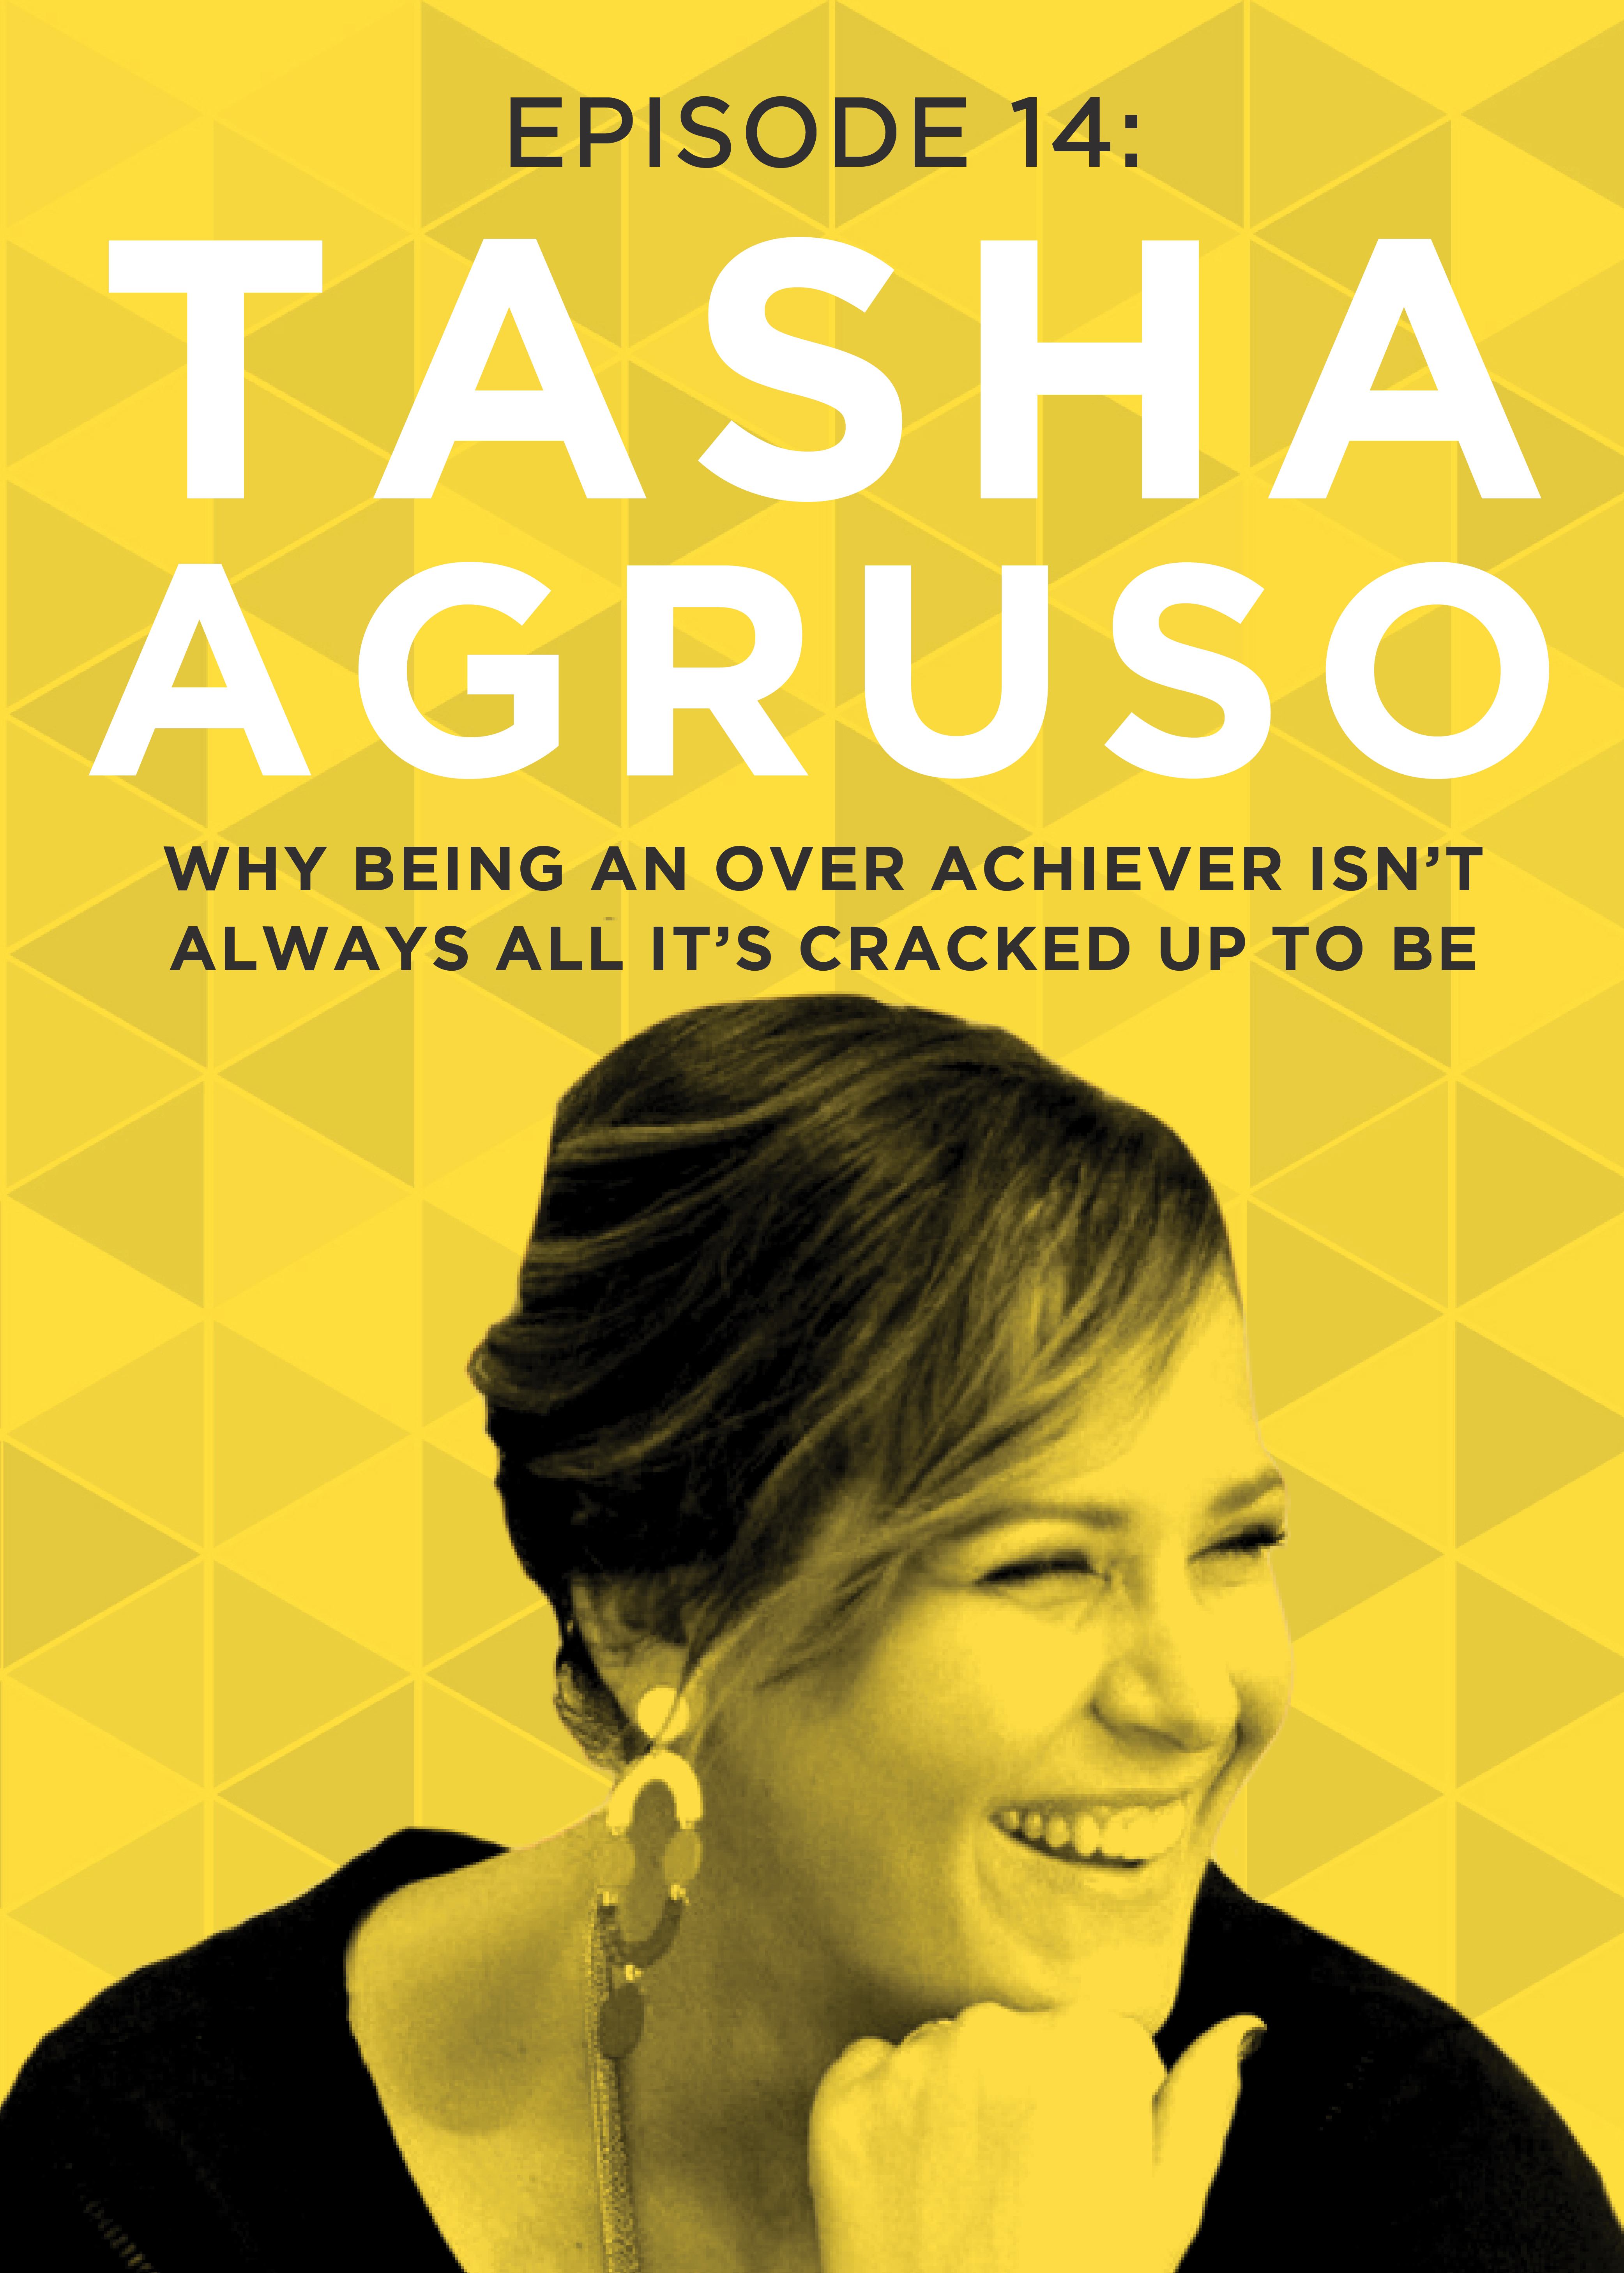 Ep 14: Why Being An Over Achiever Isn’t Always All it’s Cracked Up To Be with Tasha Agruso